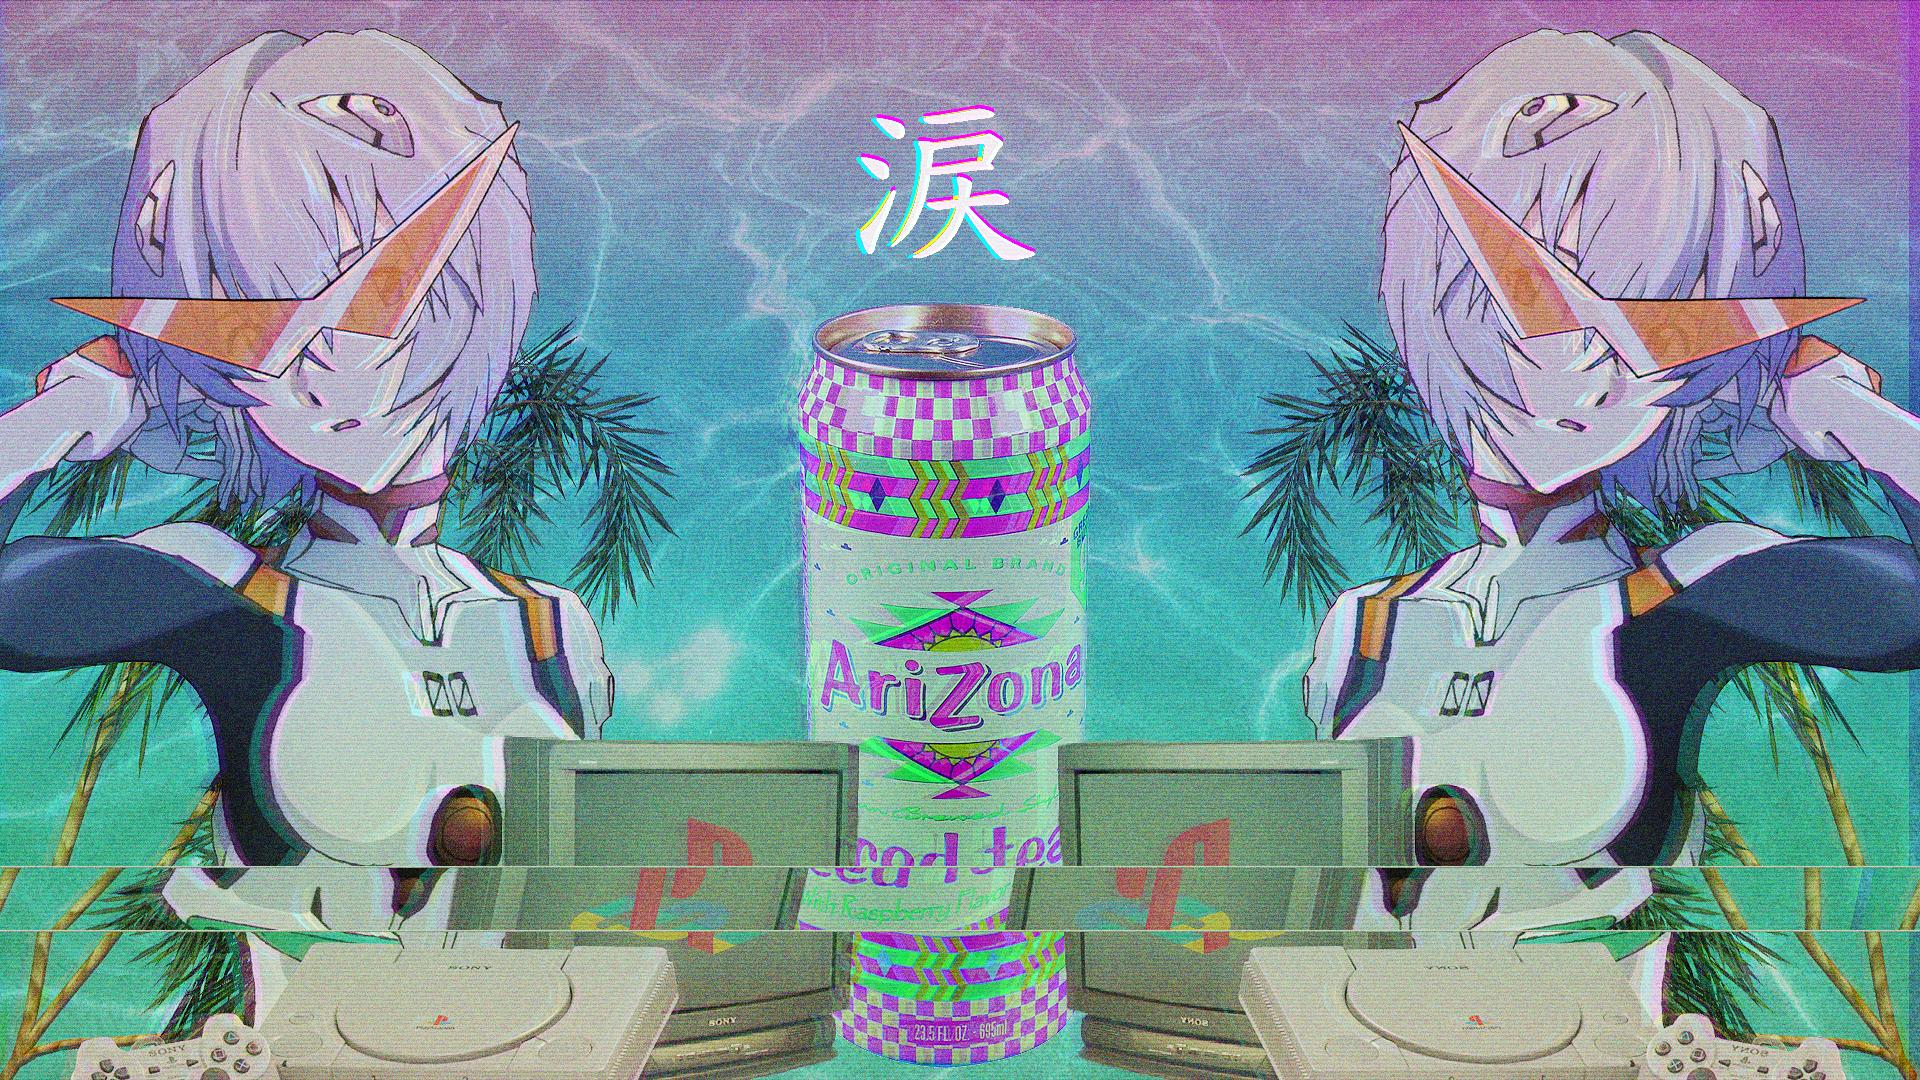 Free Aesthetic Vaporwave Wallpaper High Quality Resolution at